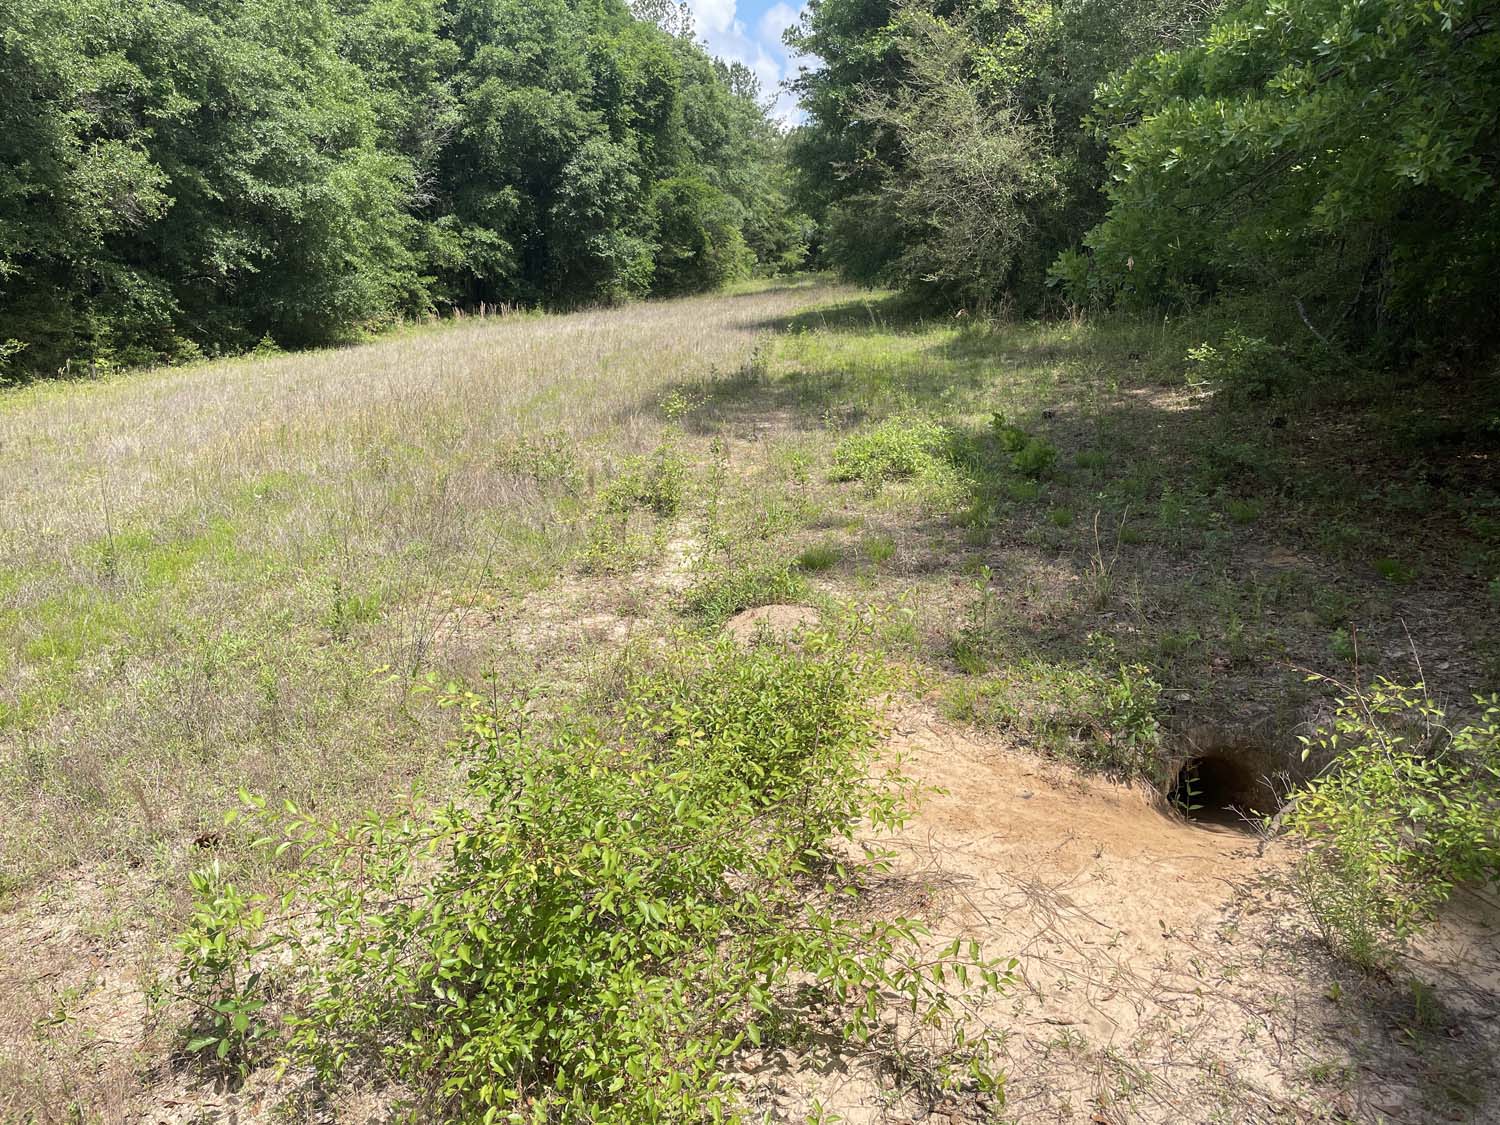 One of several wildlife food plots. Notice the gopher tortoise den hole